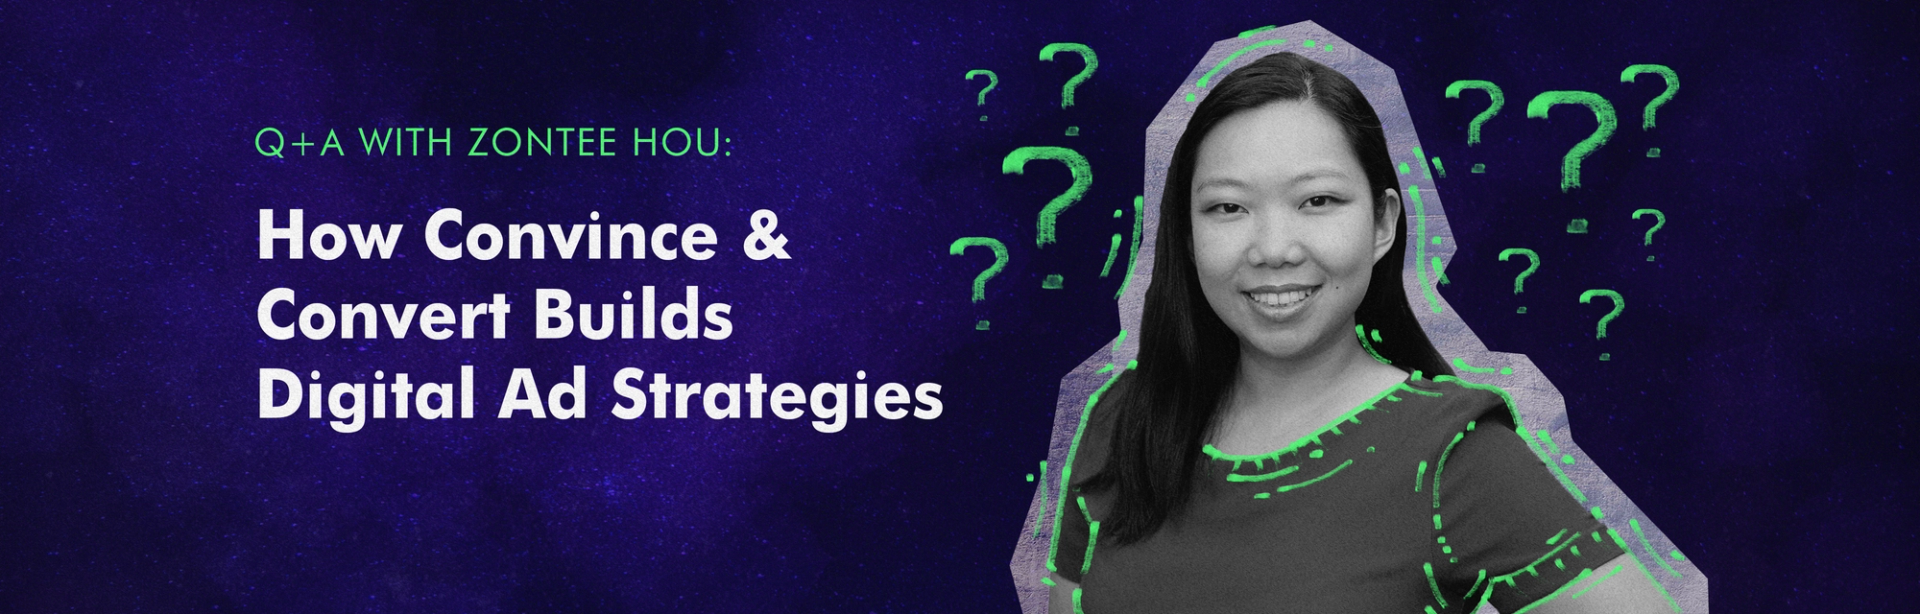 Q&A with Zontee Hou: Building Digital Ad Strategies that Work